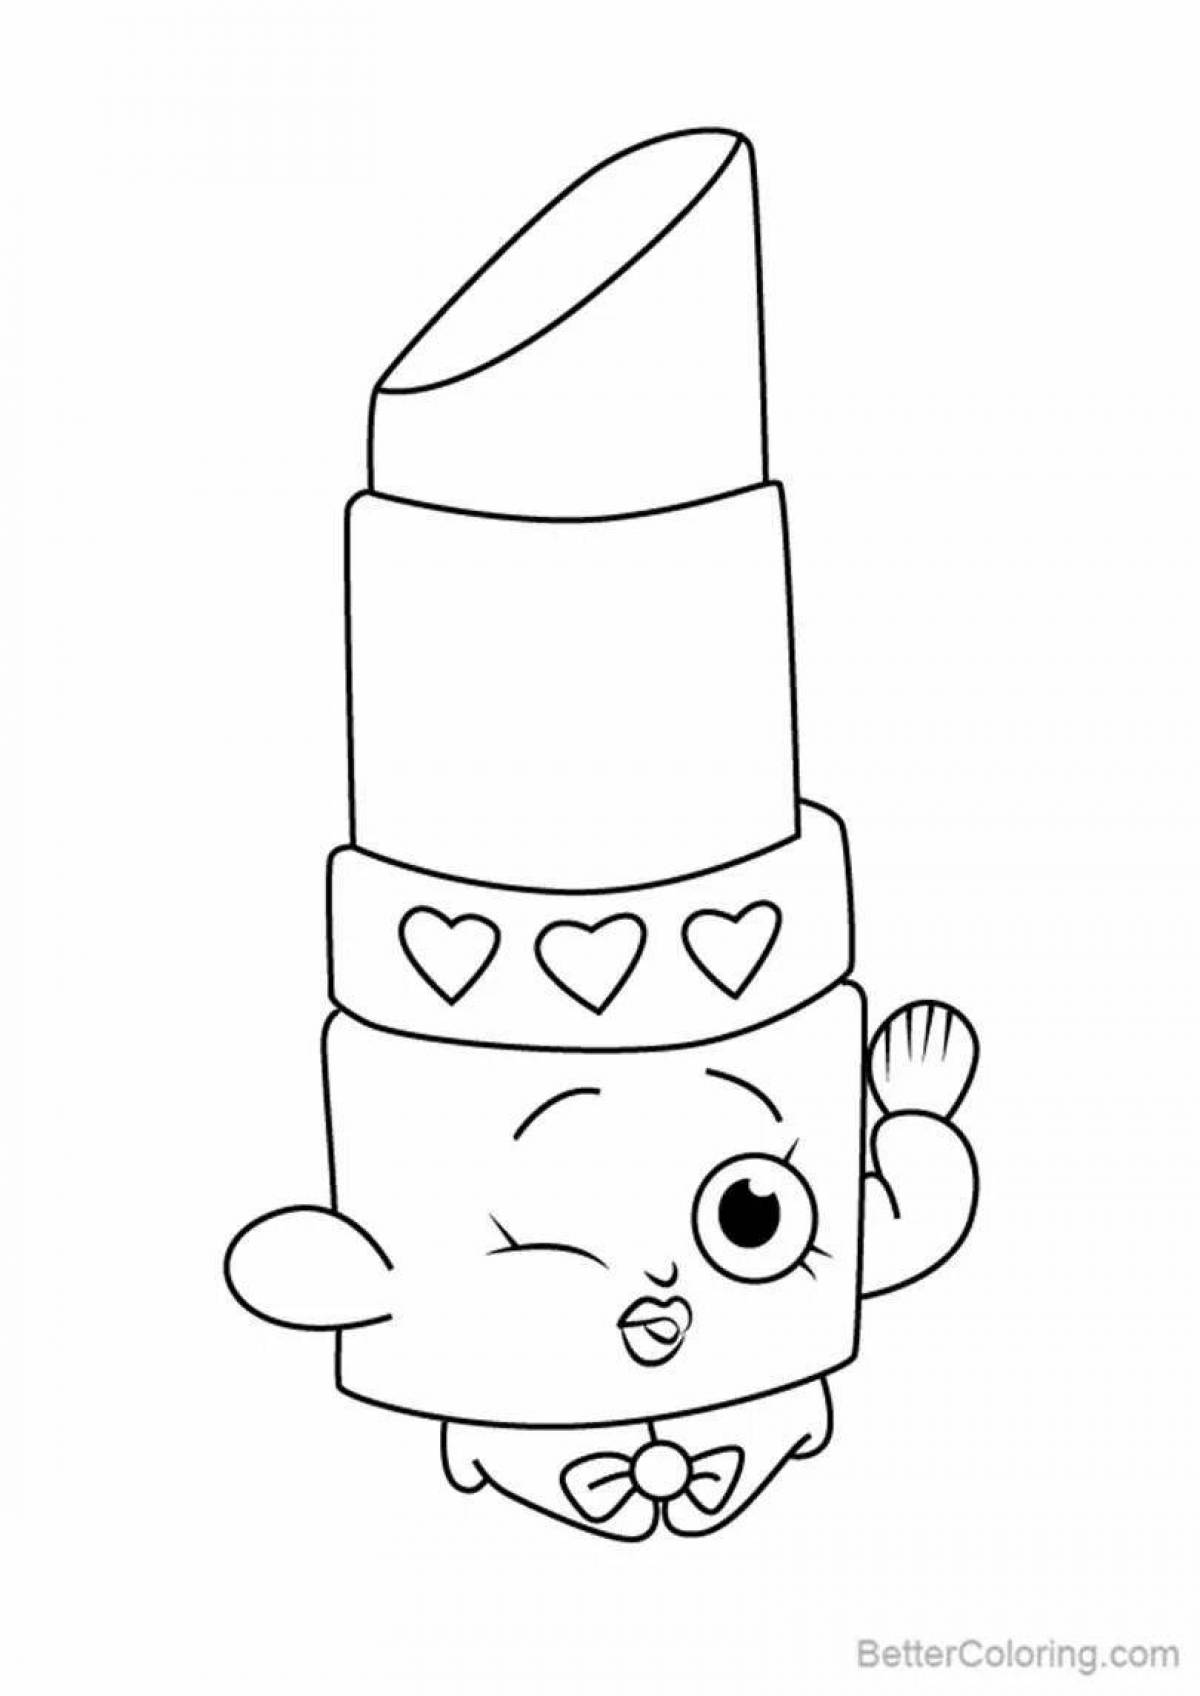 Fun three markers challenge coloring page